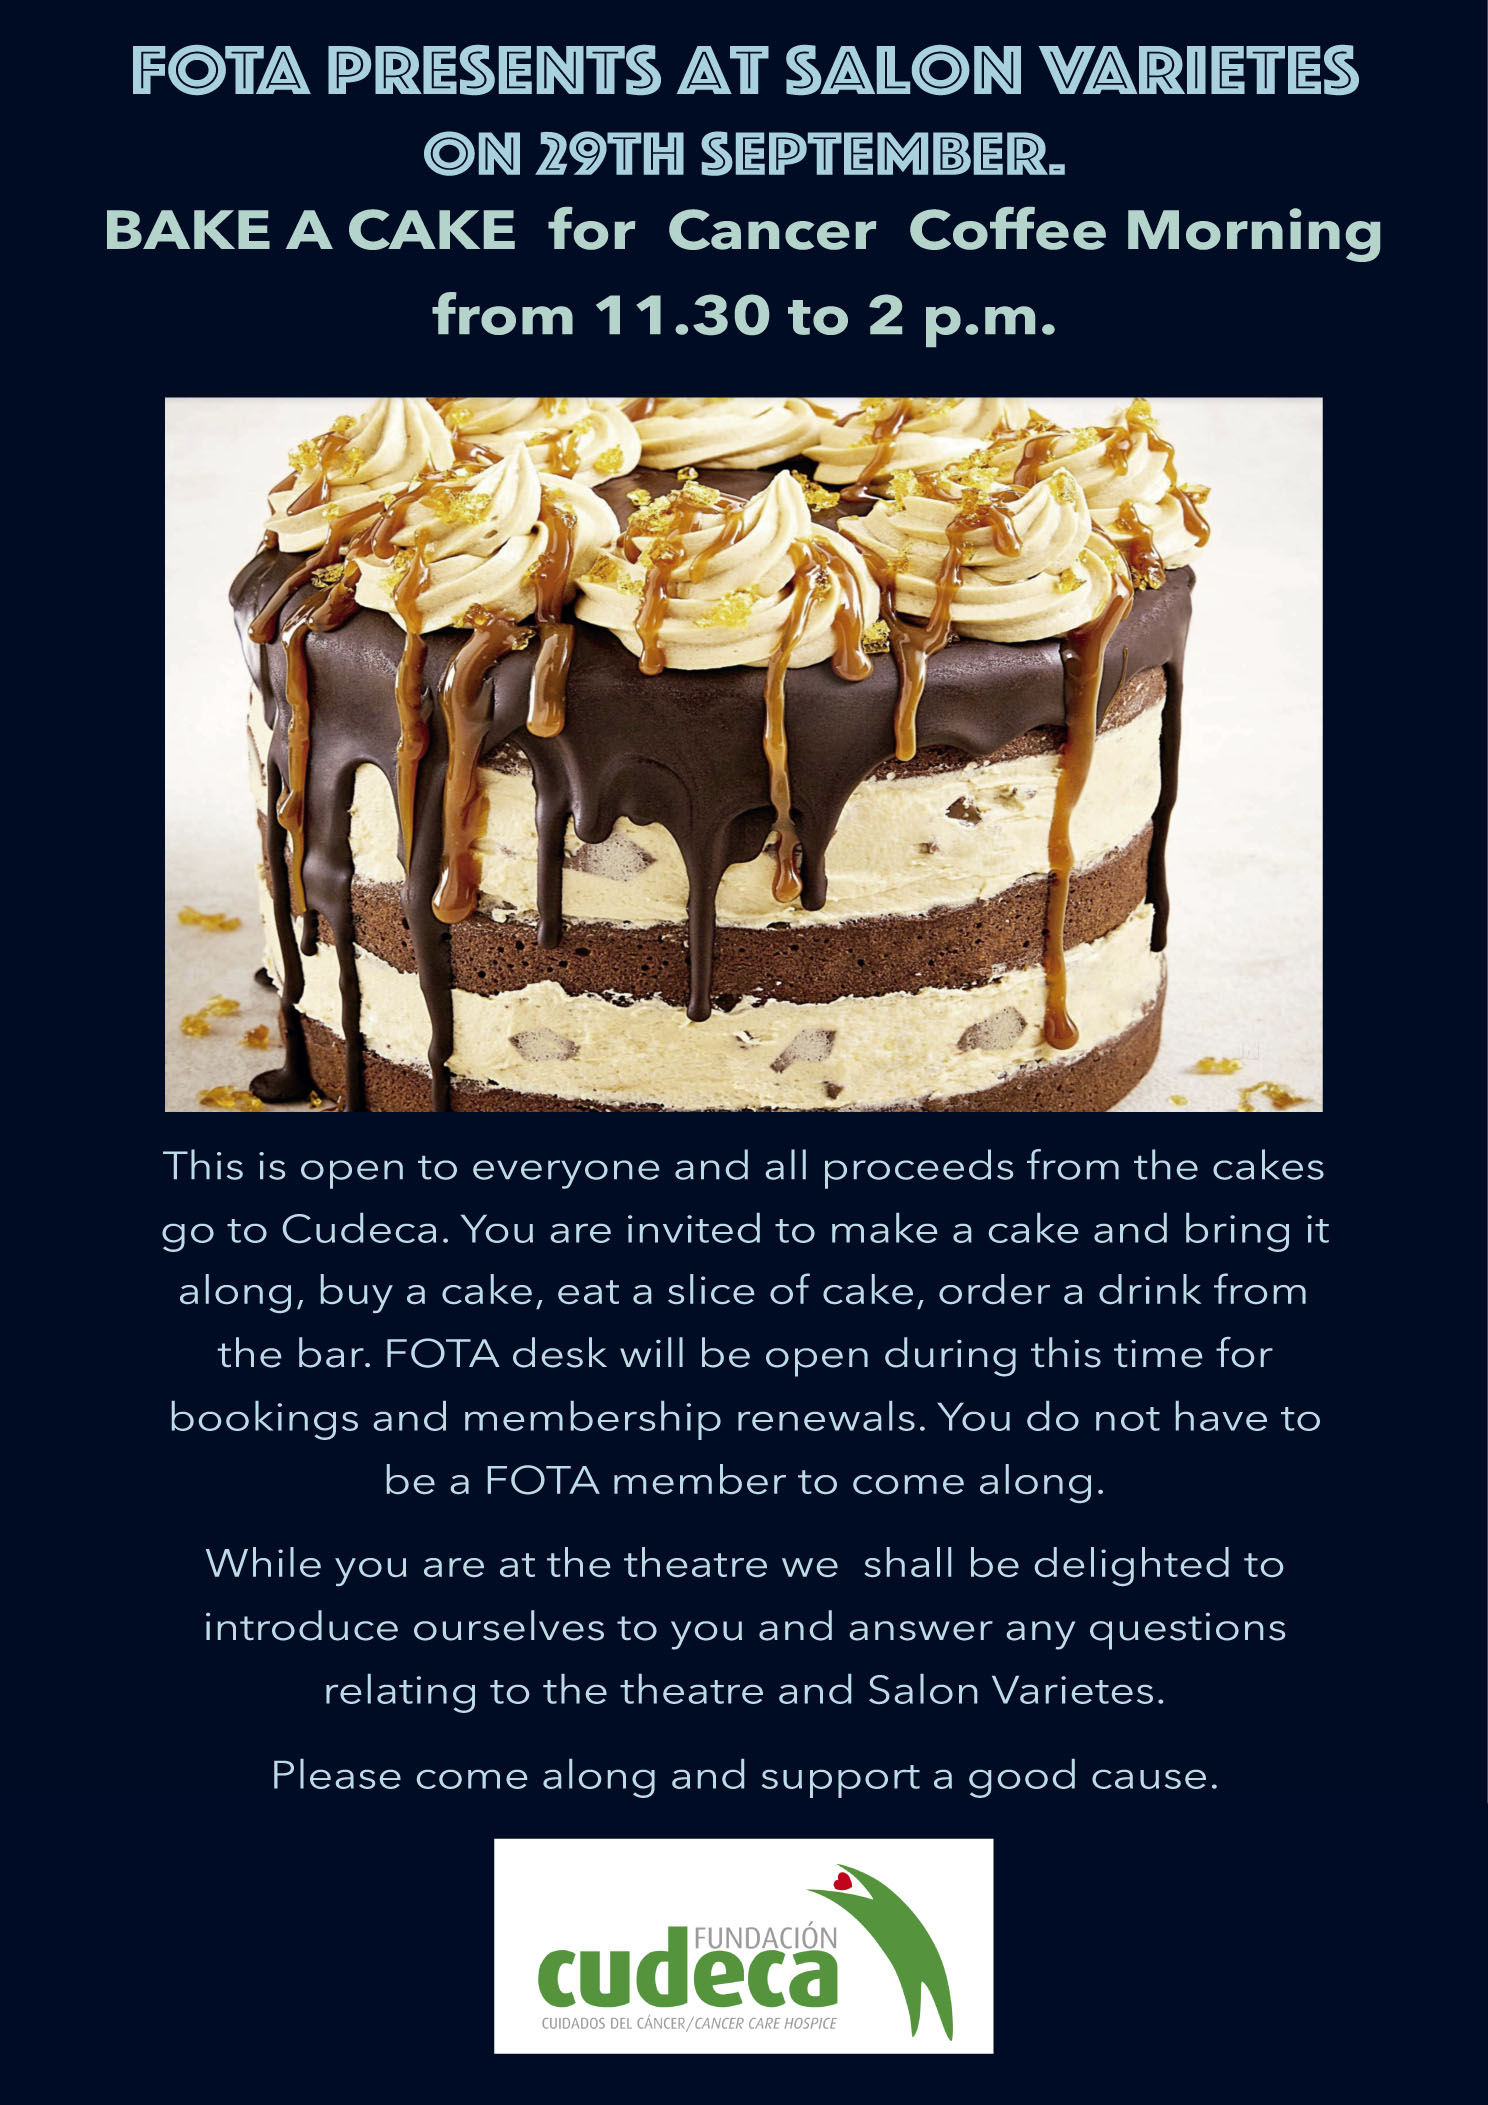 FOTA presents Bake a Cake for Cancer Coffee Morning!